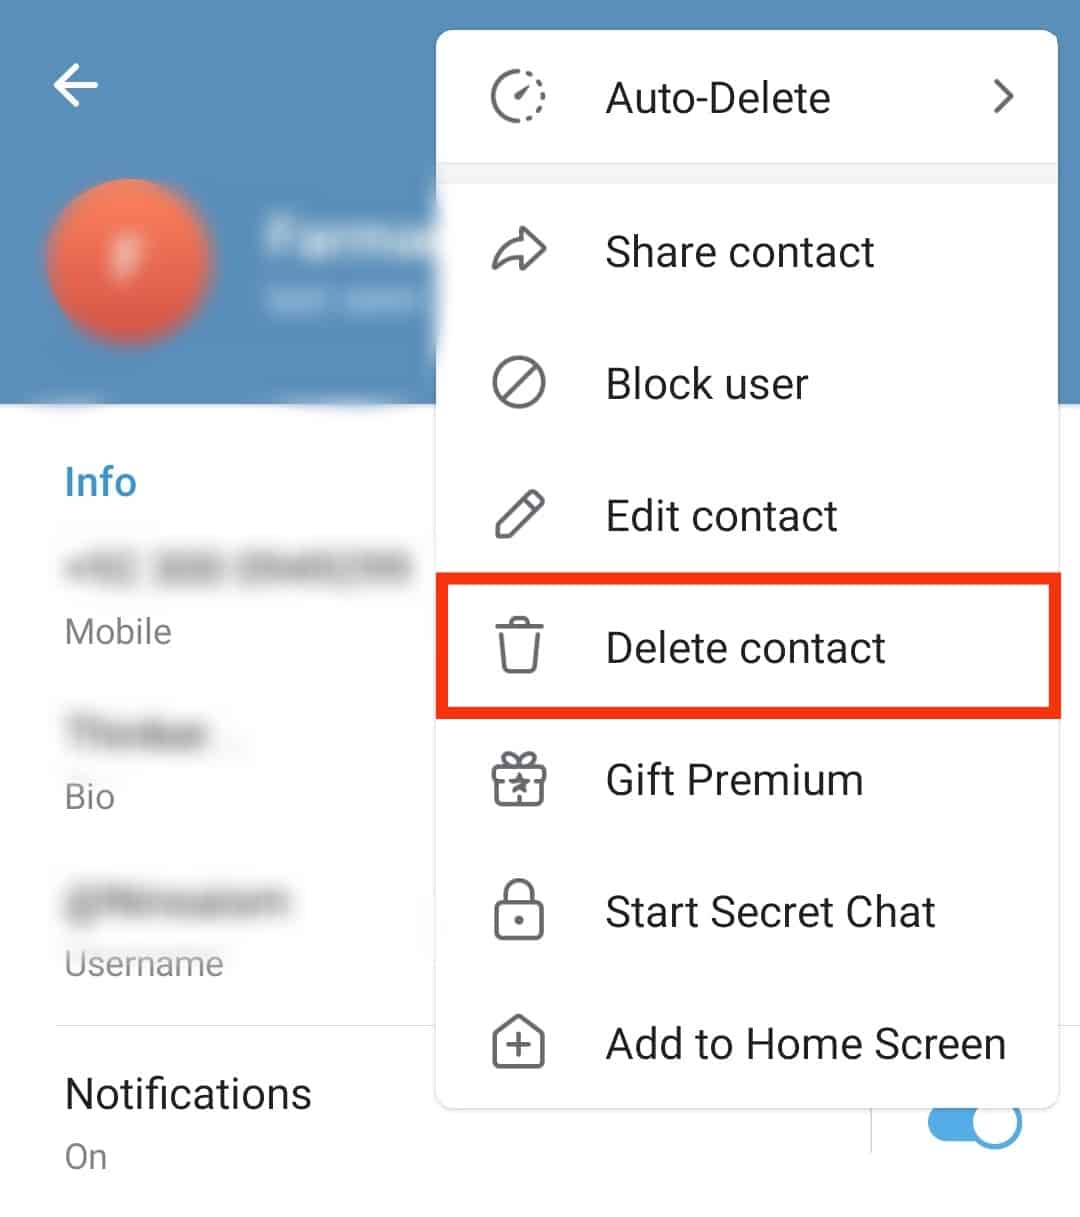 Select The Delete Contact Option